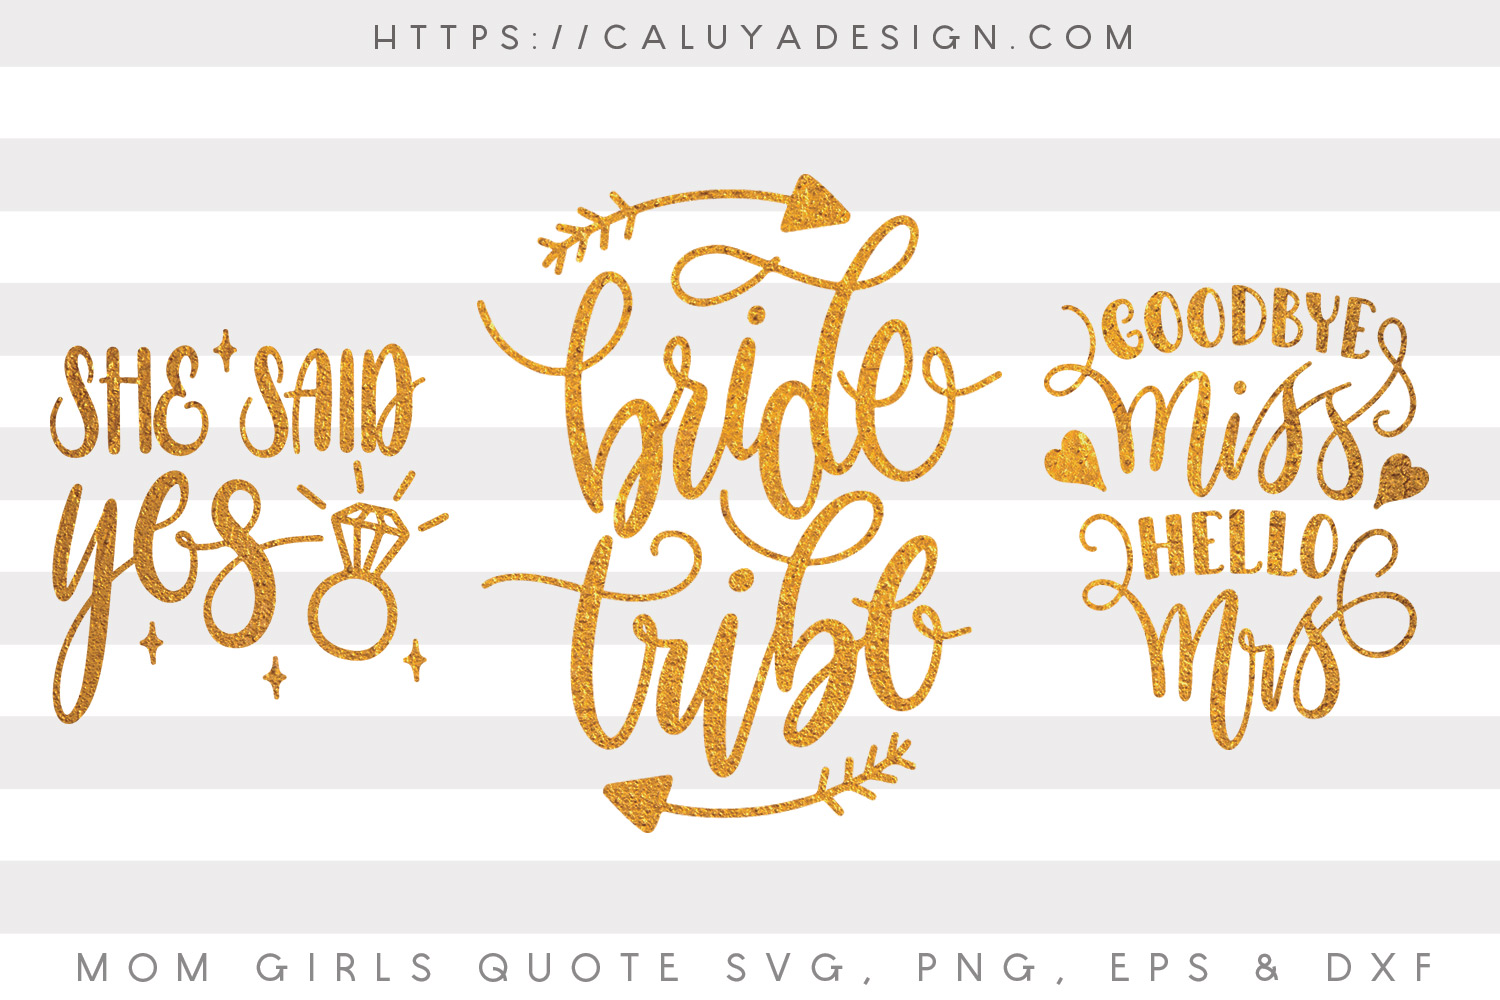 Download Free Wedding Svgs PSD Mockup Templates